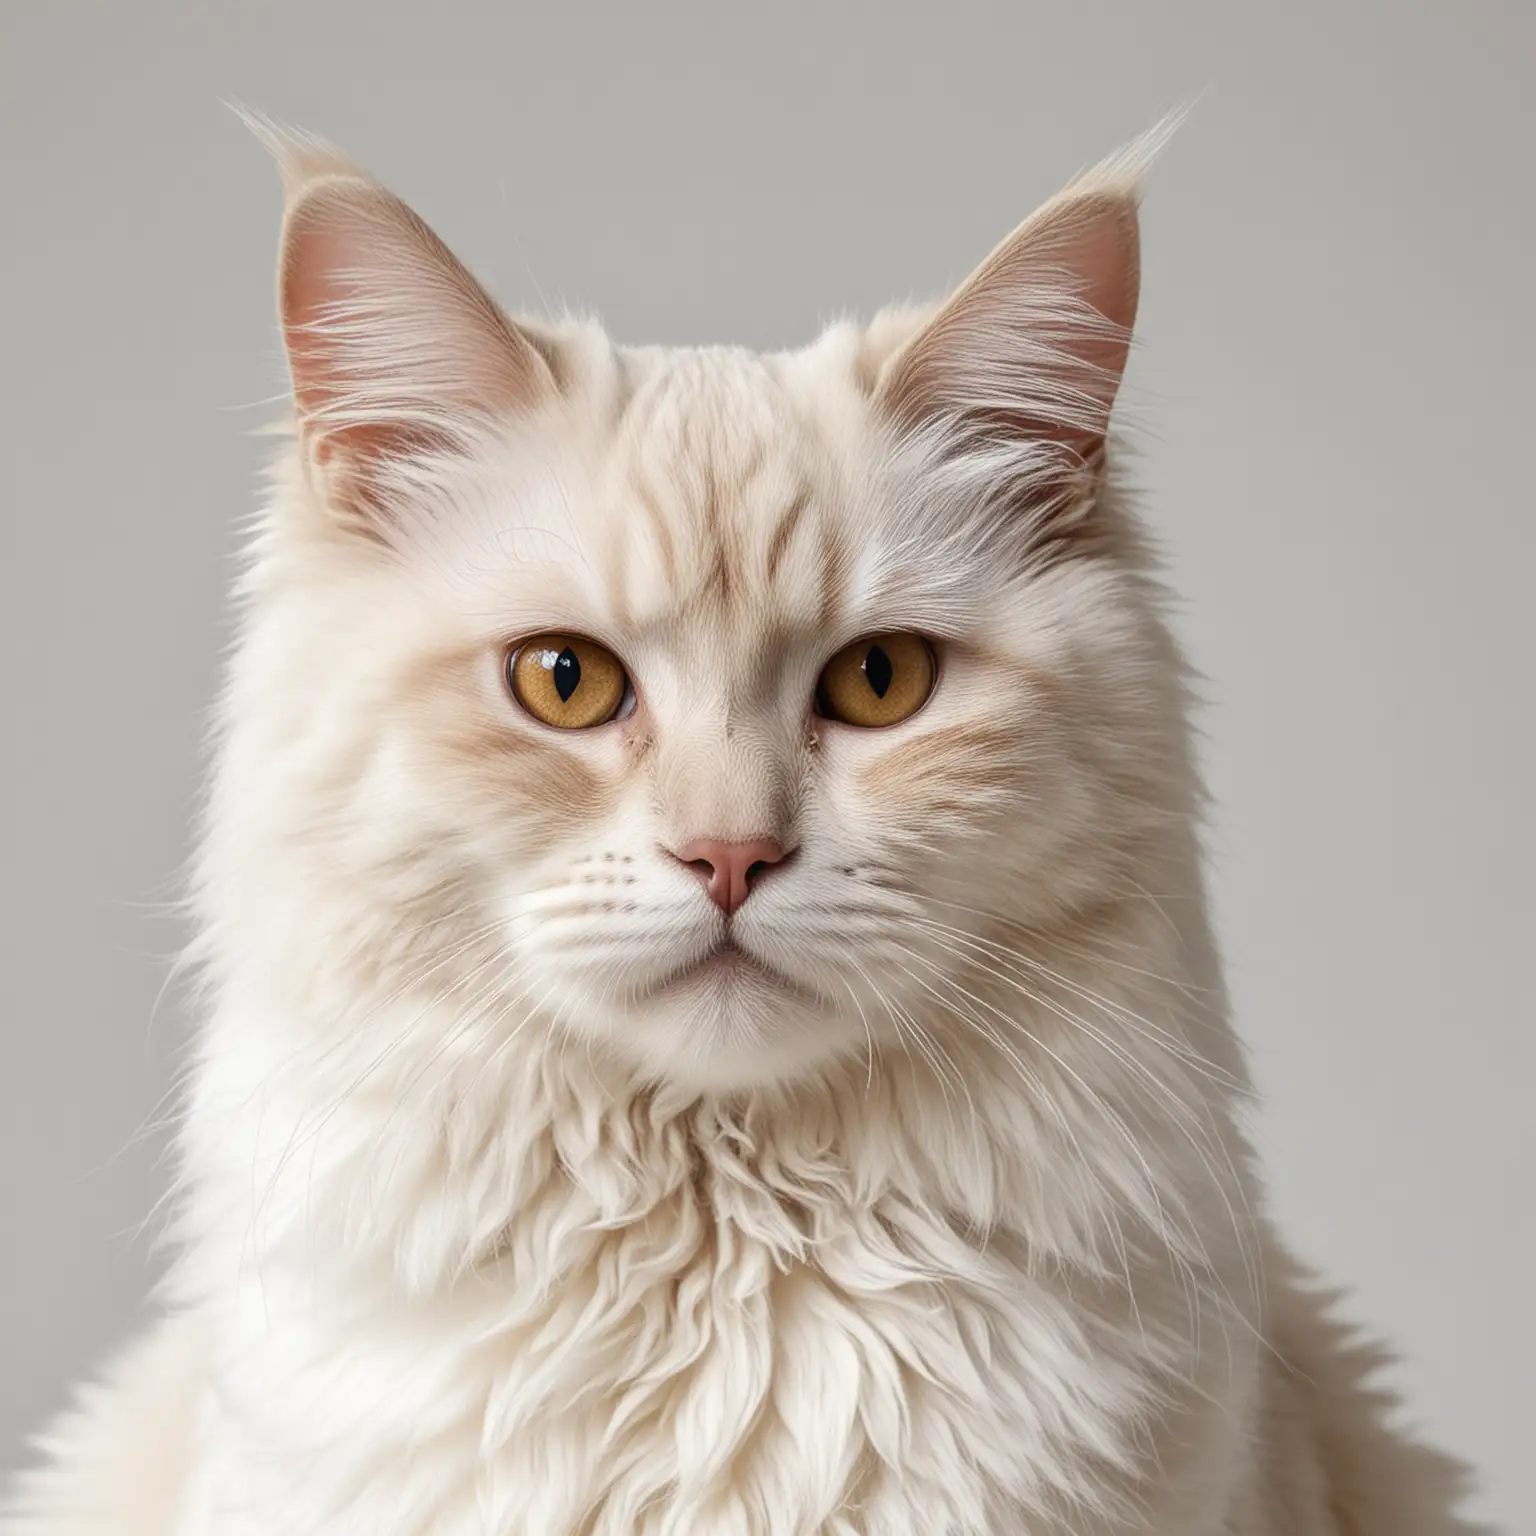 LongHaired Oriental Cat on White Background